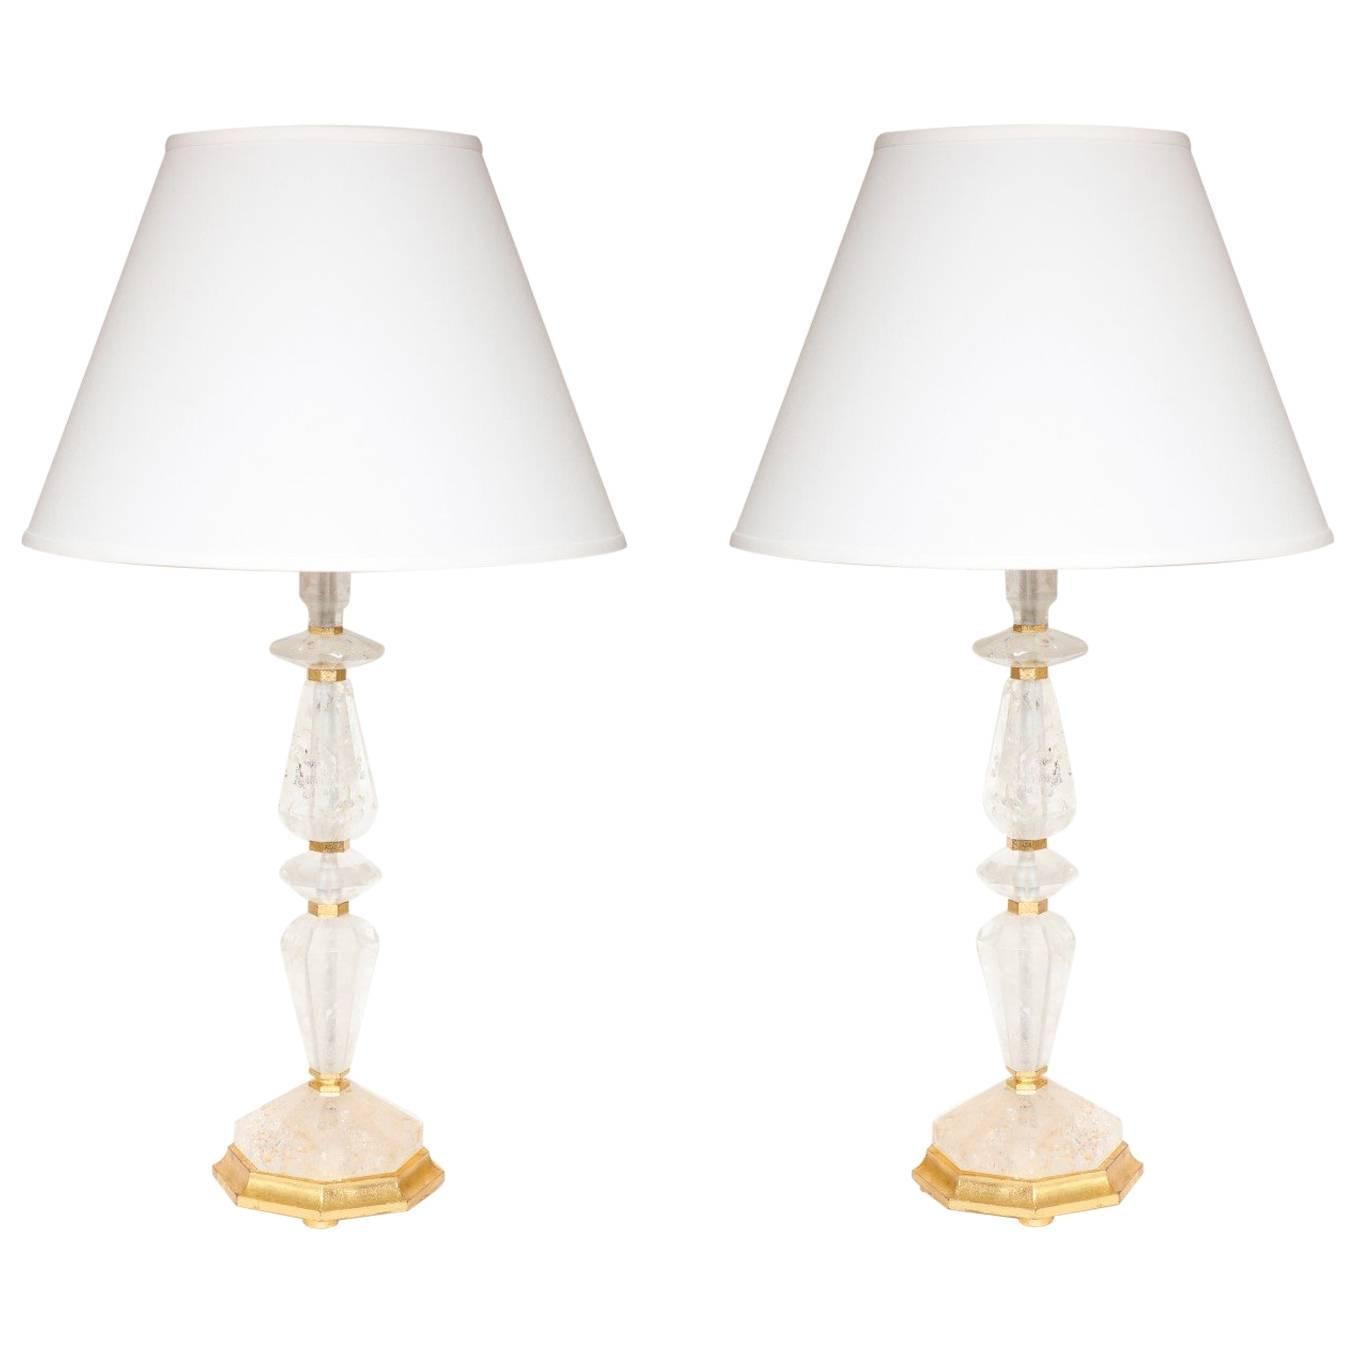 A Pair of New Rock Crystal Table Lamps